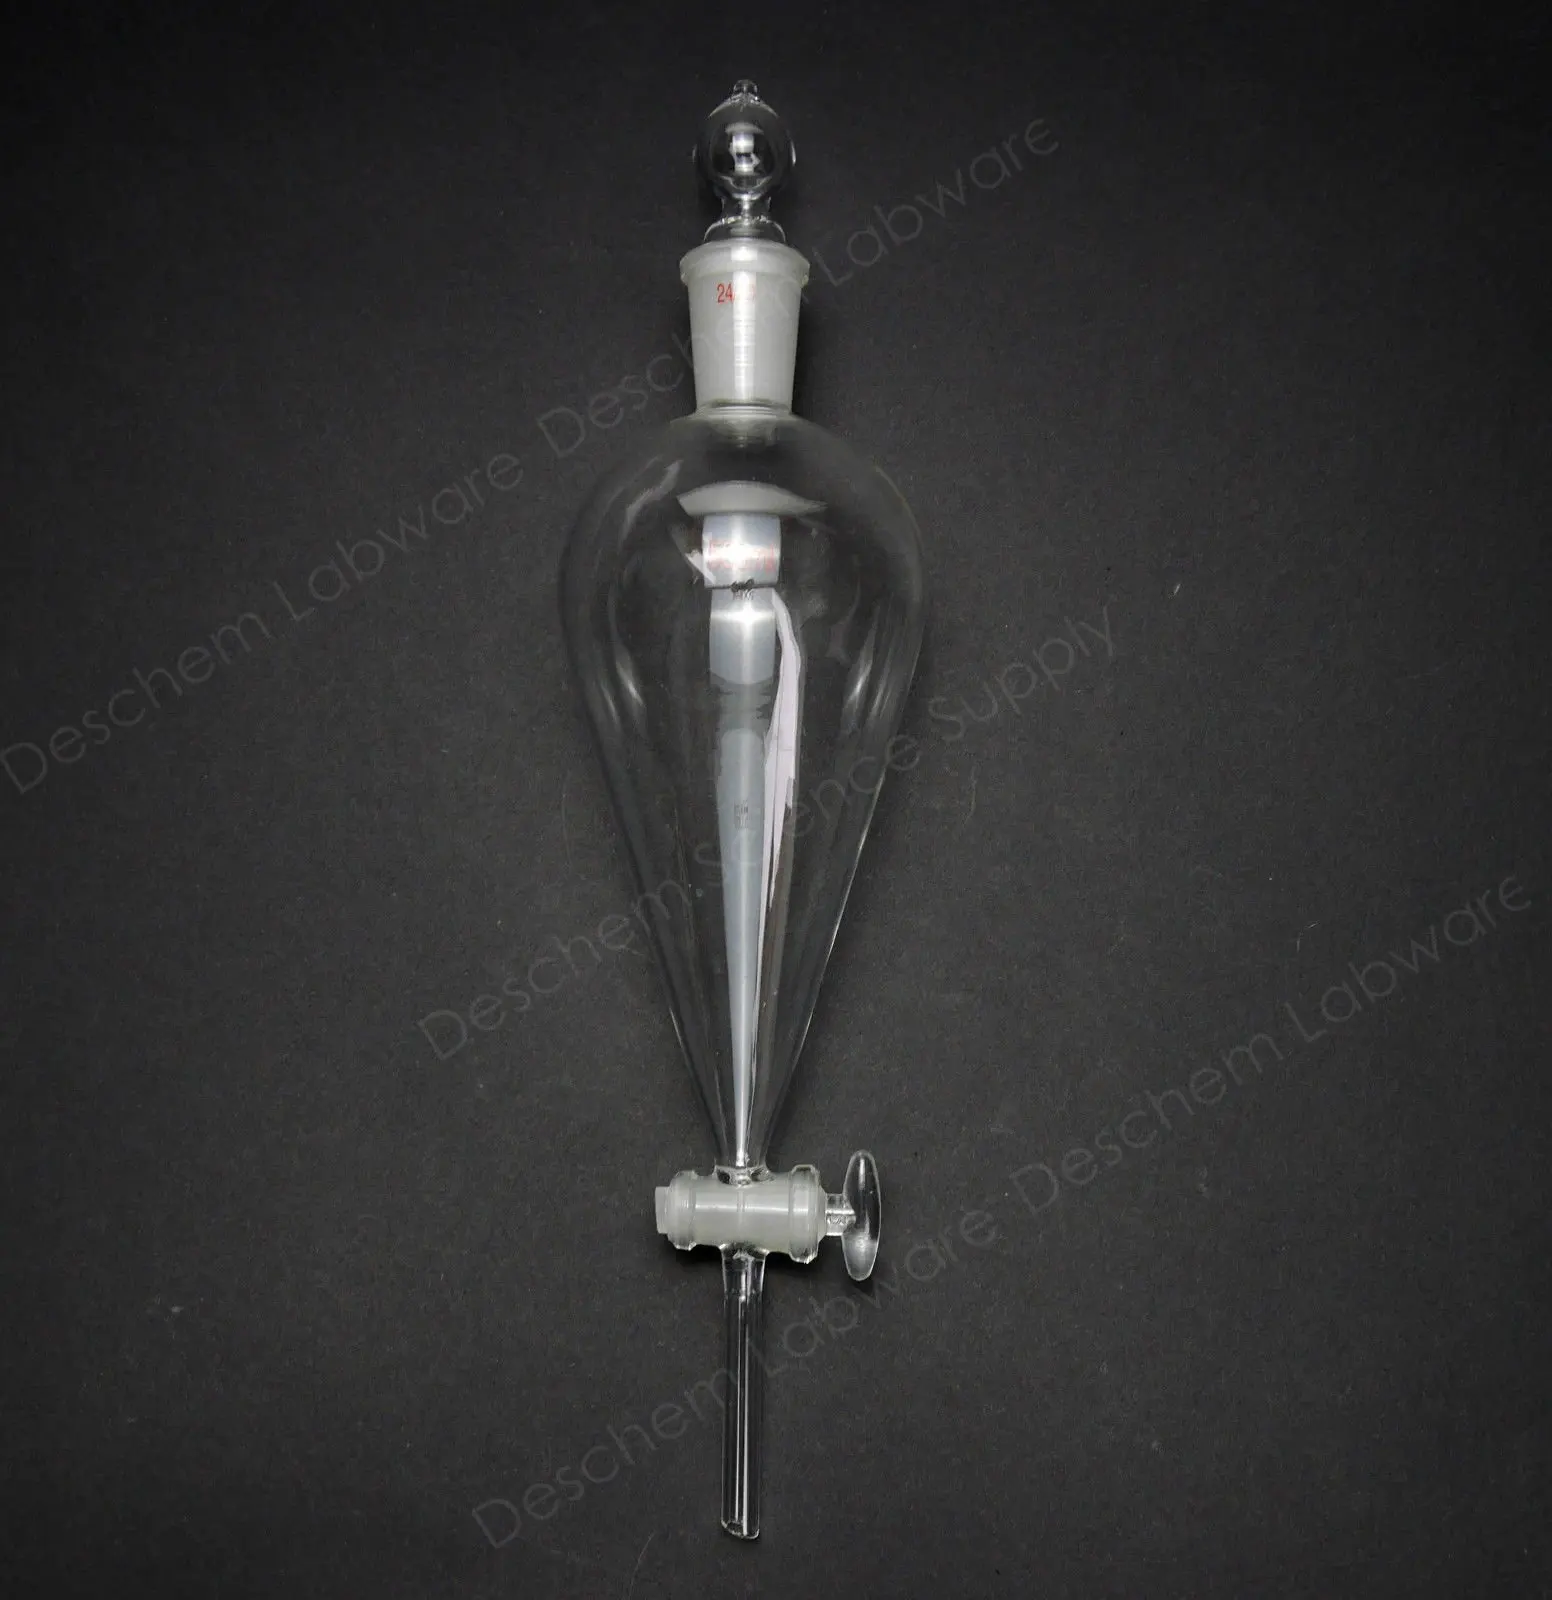 Deschem 24//29 Glass Separatory Funnel Straight Drop Tip Pyriform Pear Shape W//Glass Stopcock and Stopper